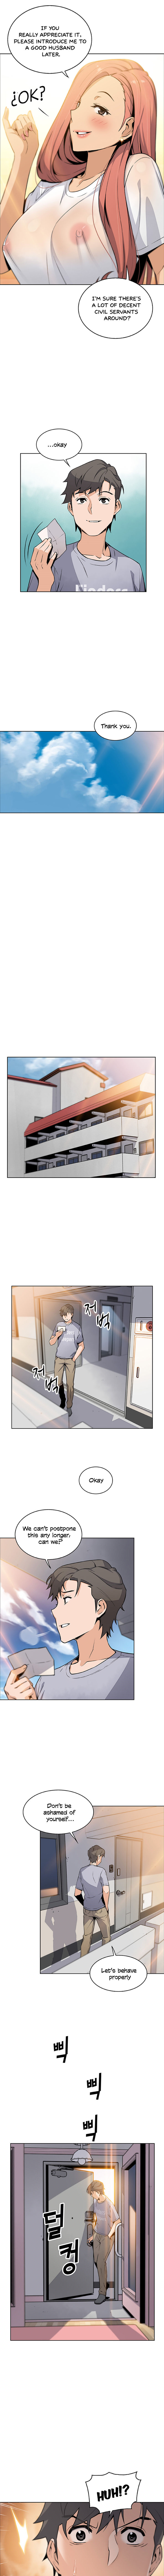 Housekeeper Manhwa - Chapter 41 Page 6